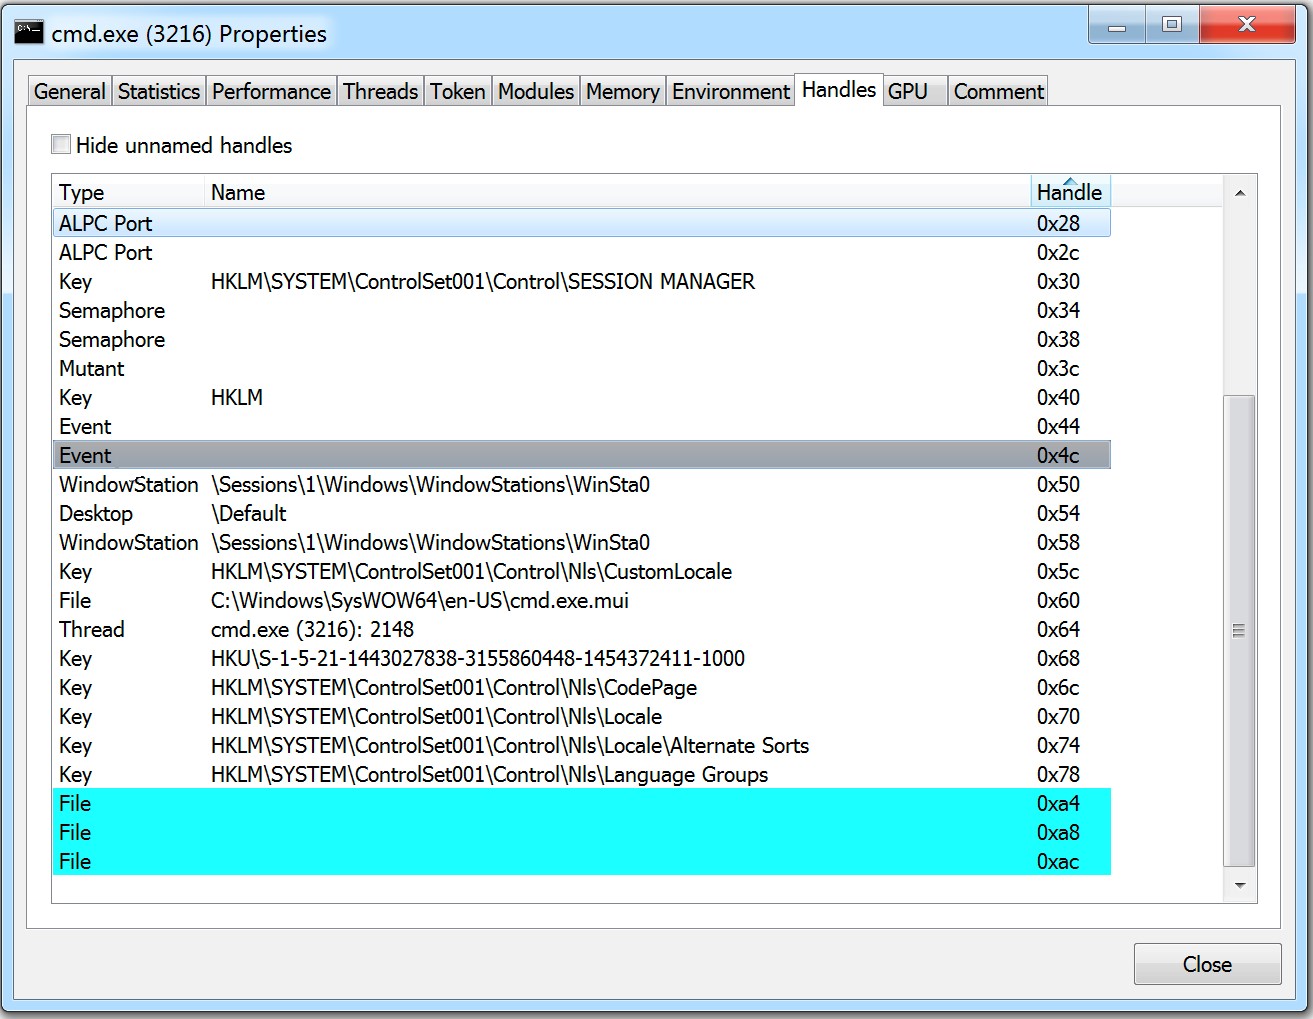 Cmd.exe inherited file handles (highlighted).